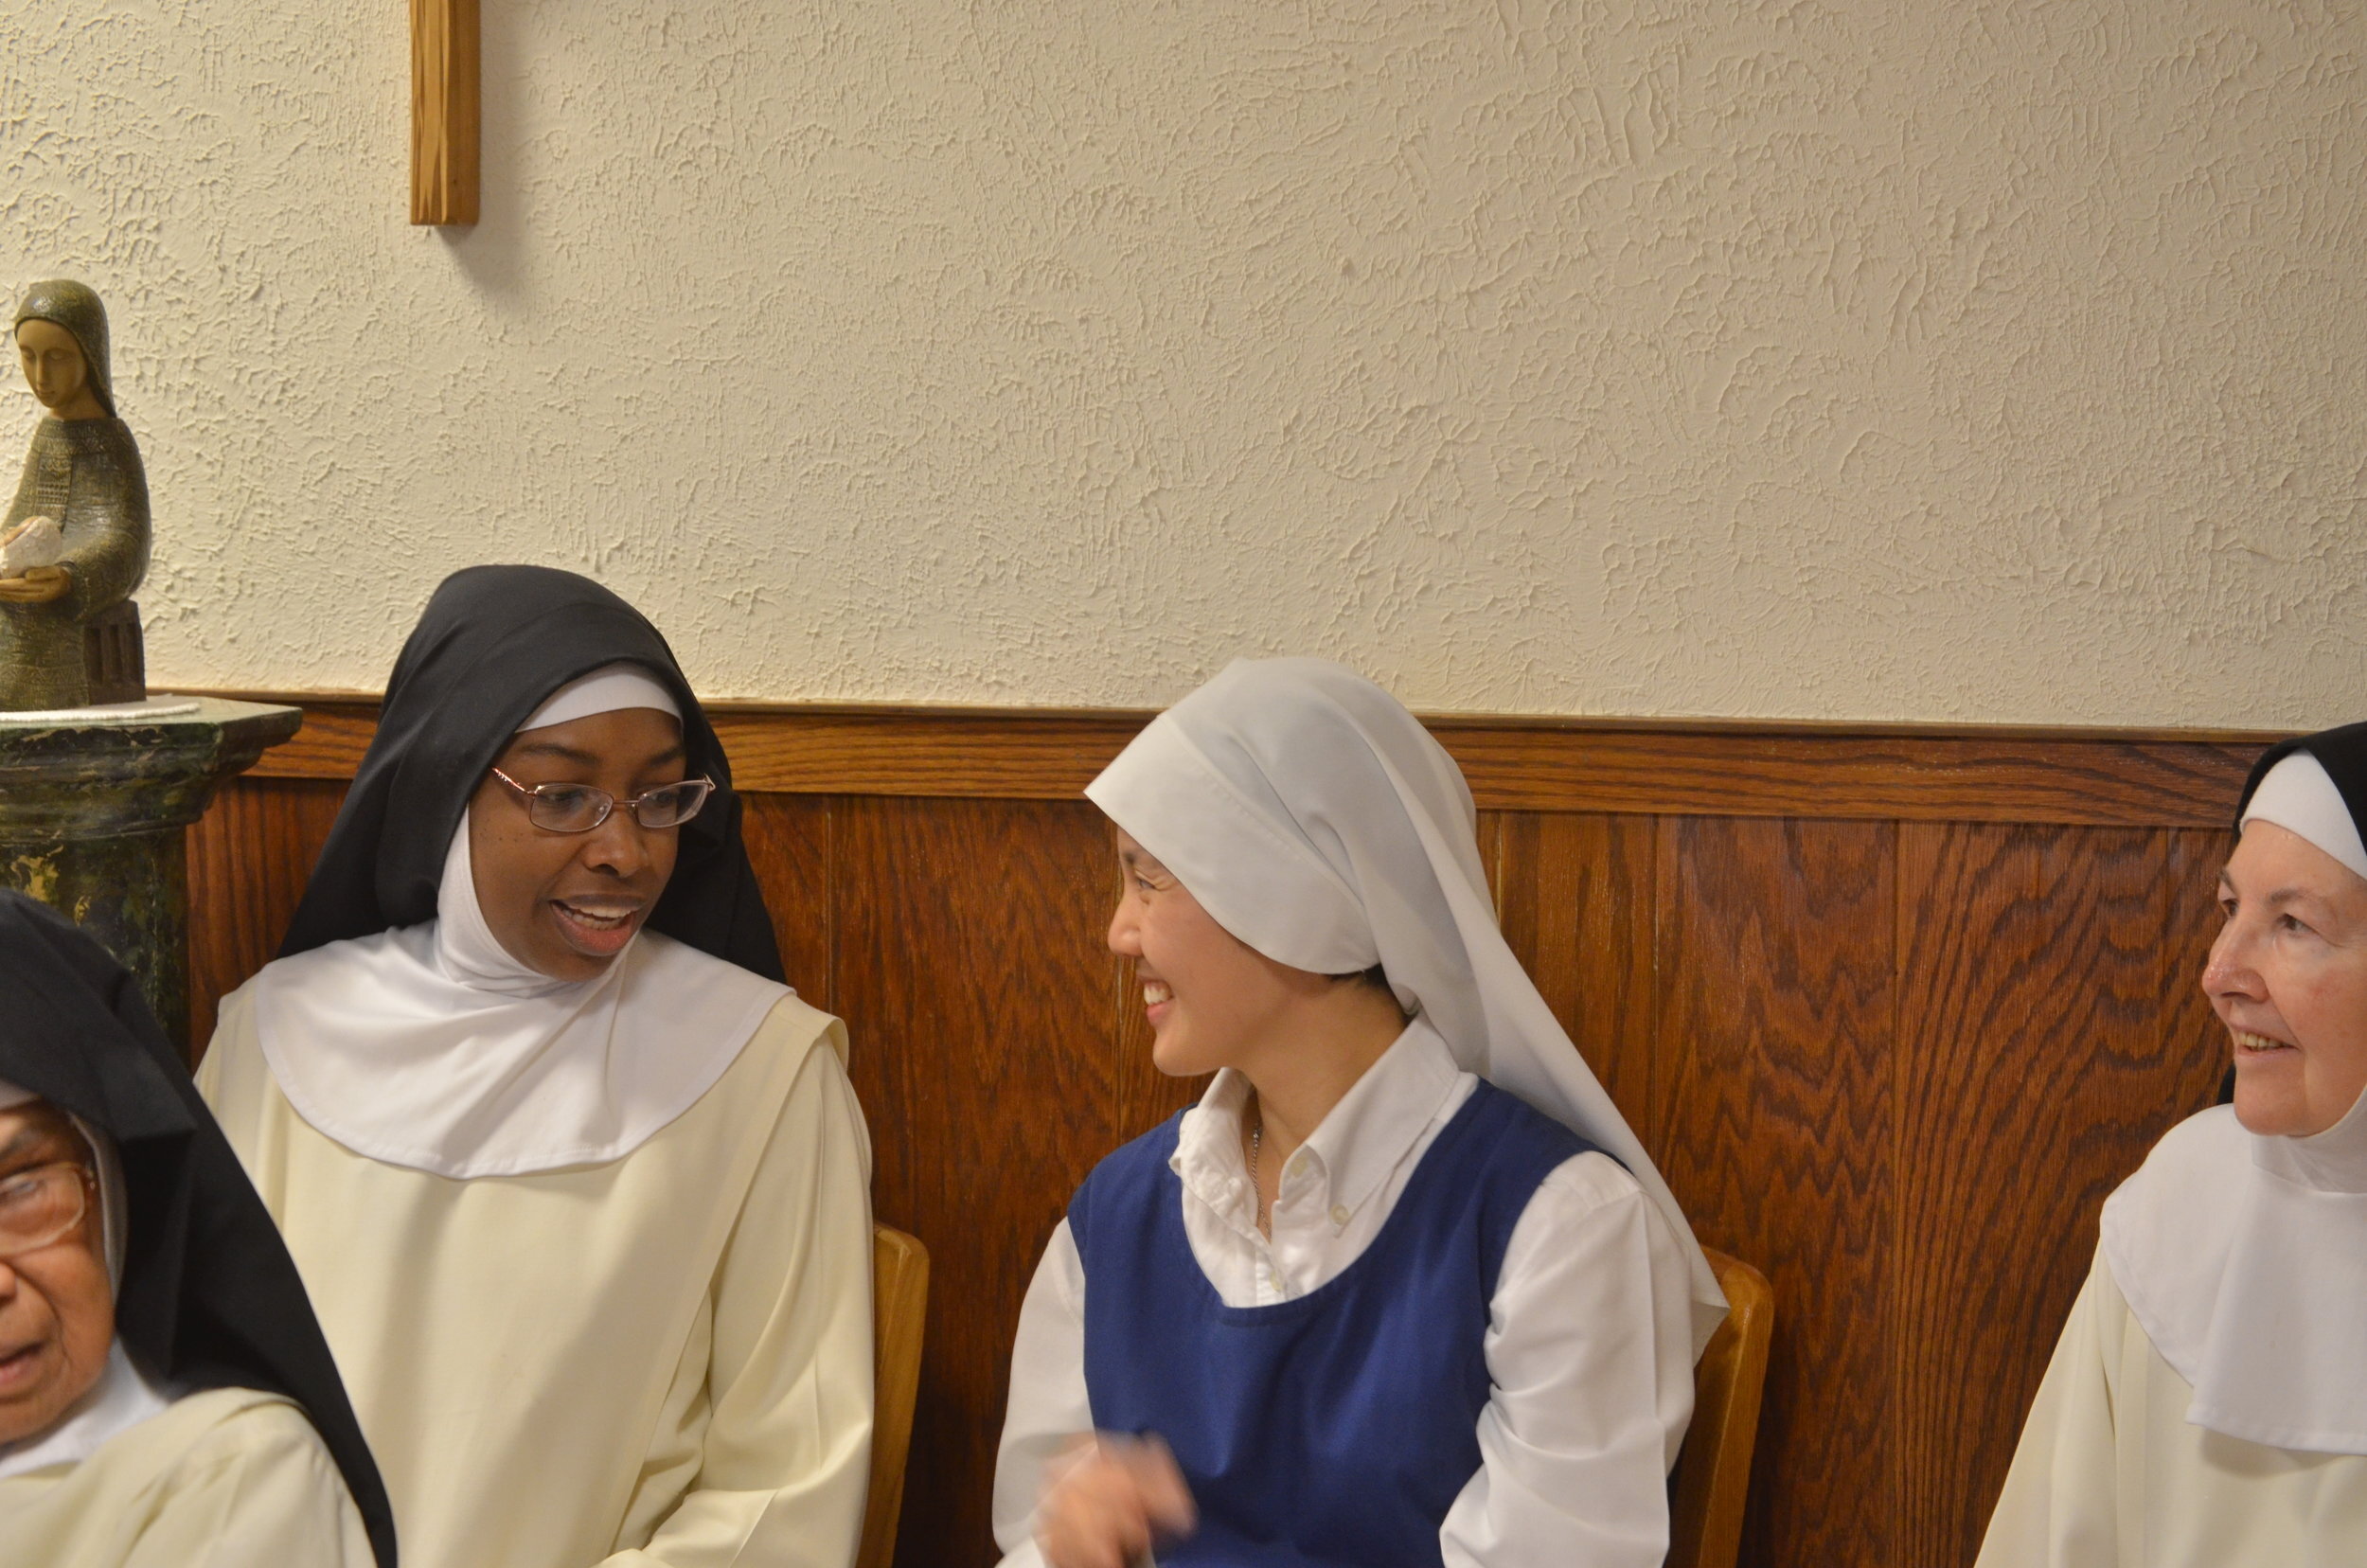 Sr. Mary Jacinta & Sr. Clare enjoy a short conversation waiting for the brothers